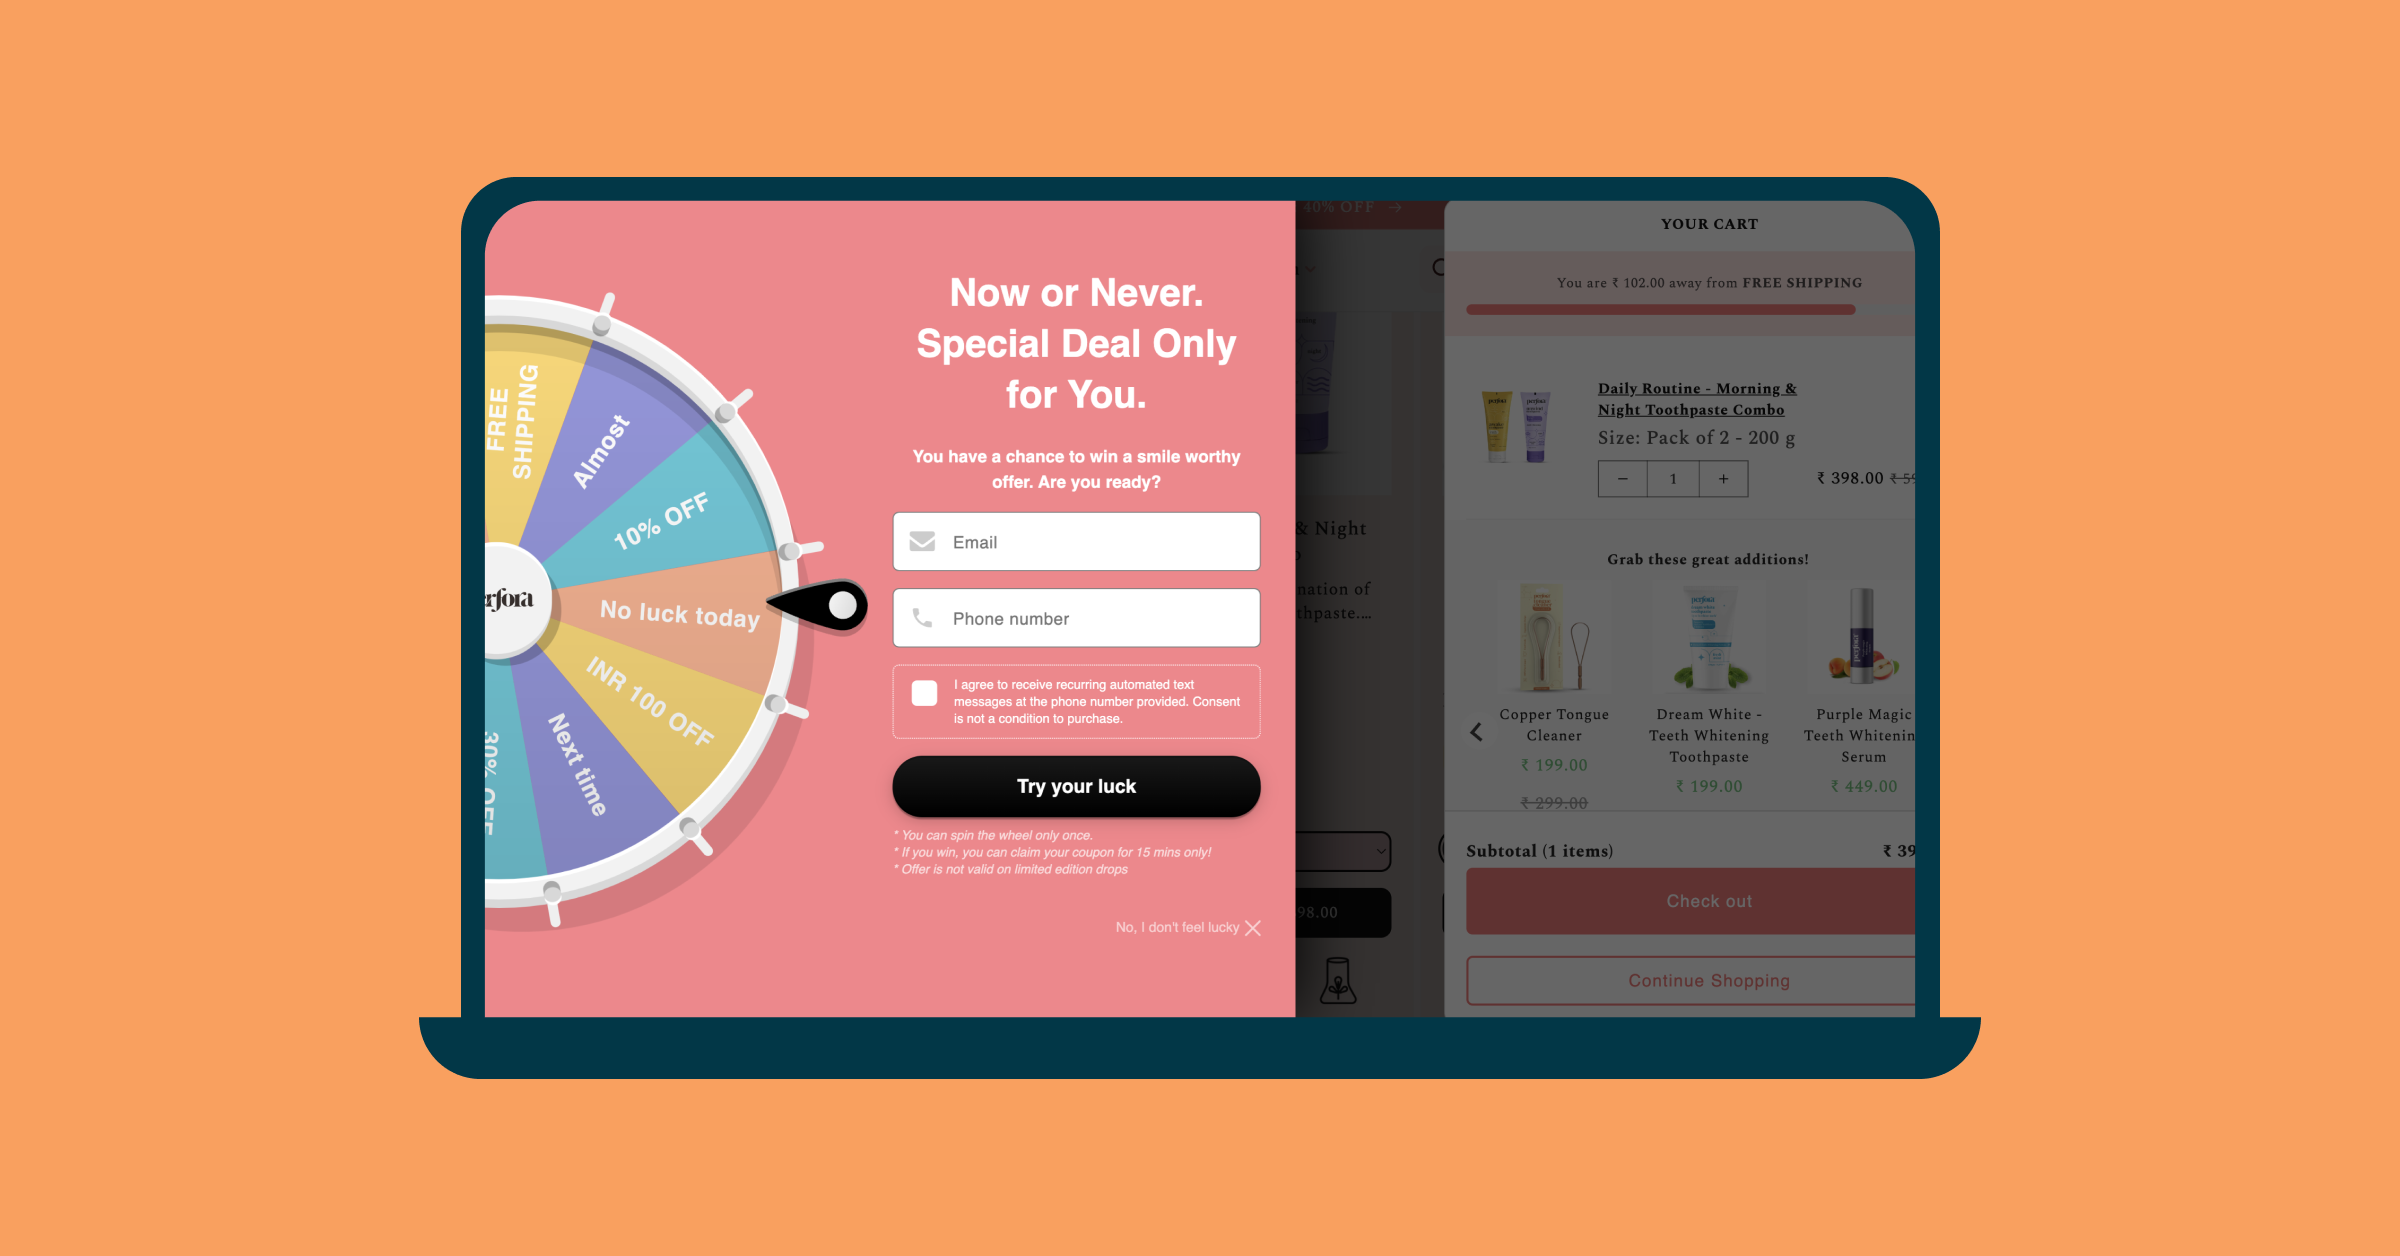 Perfora spin-the-wheel sweepstakes for unknown users